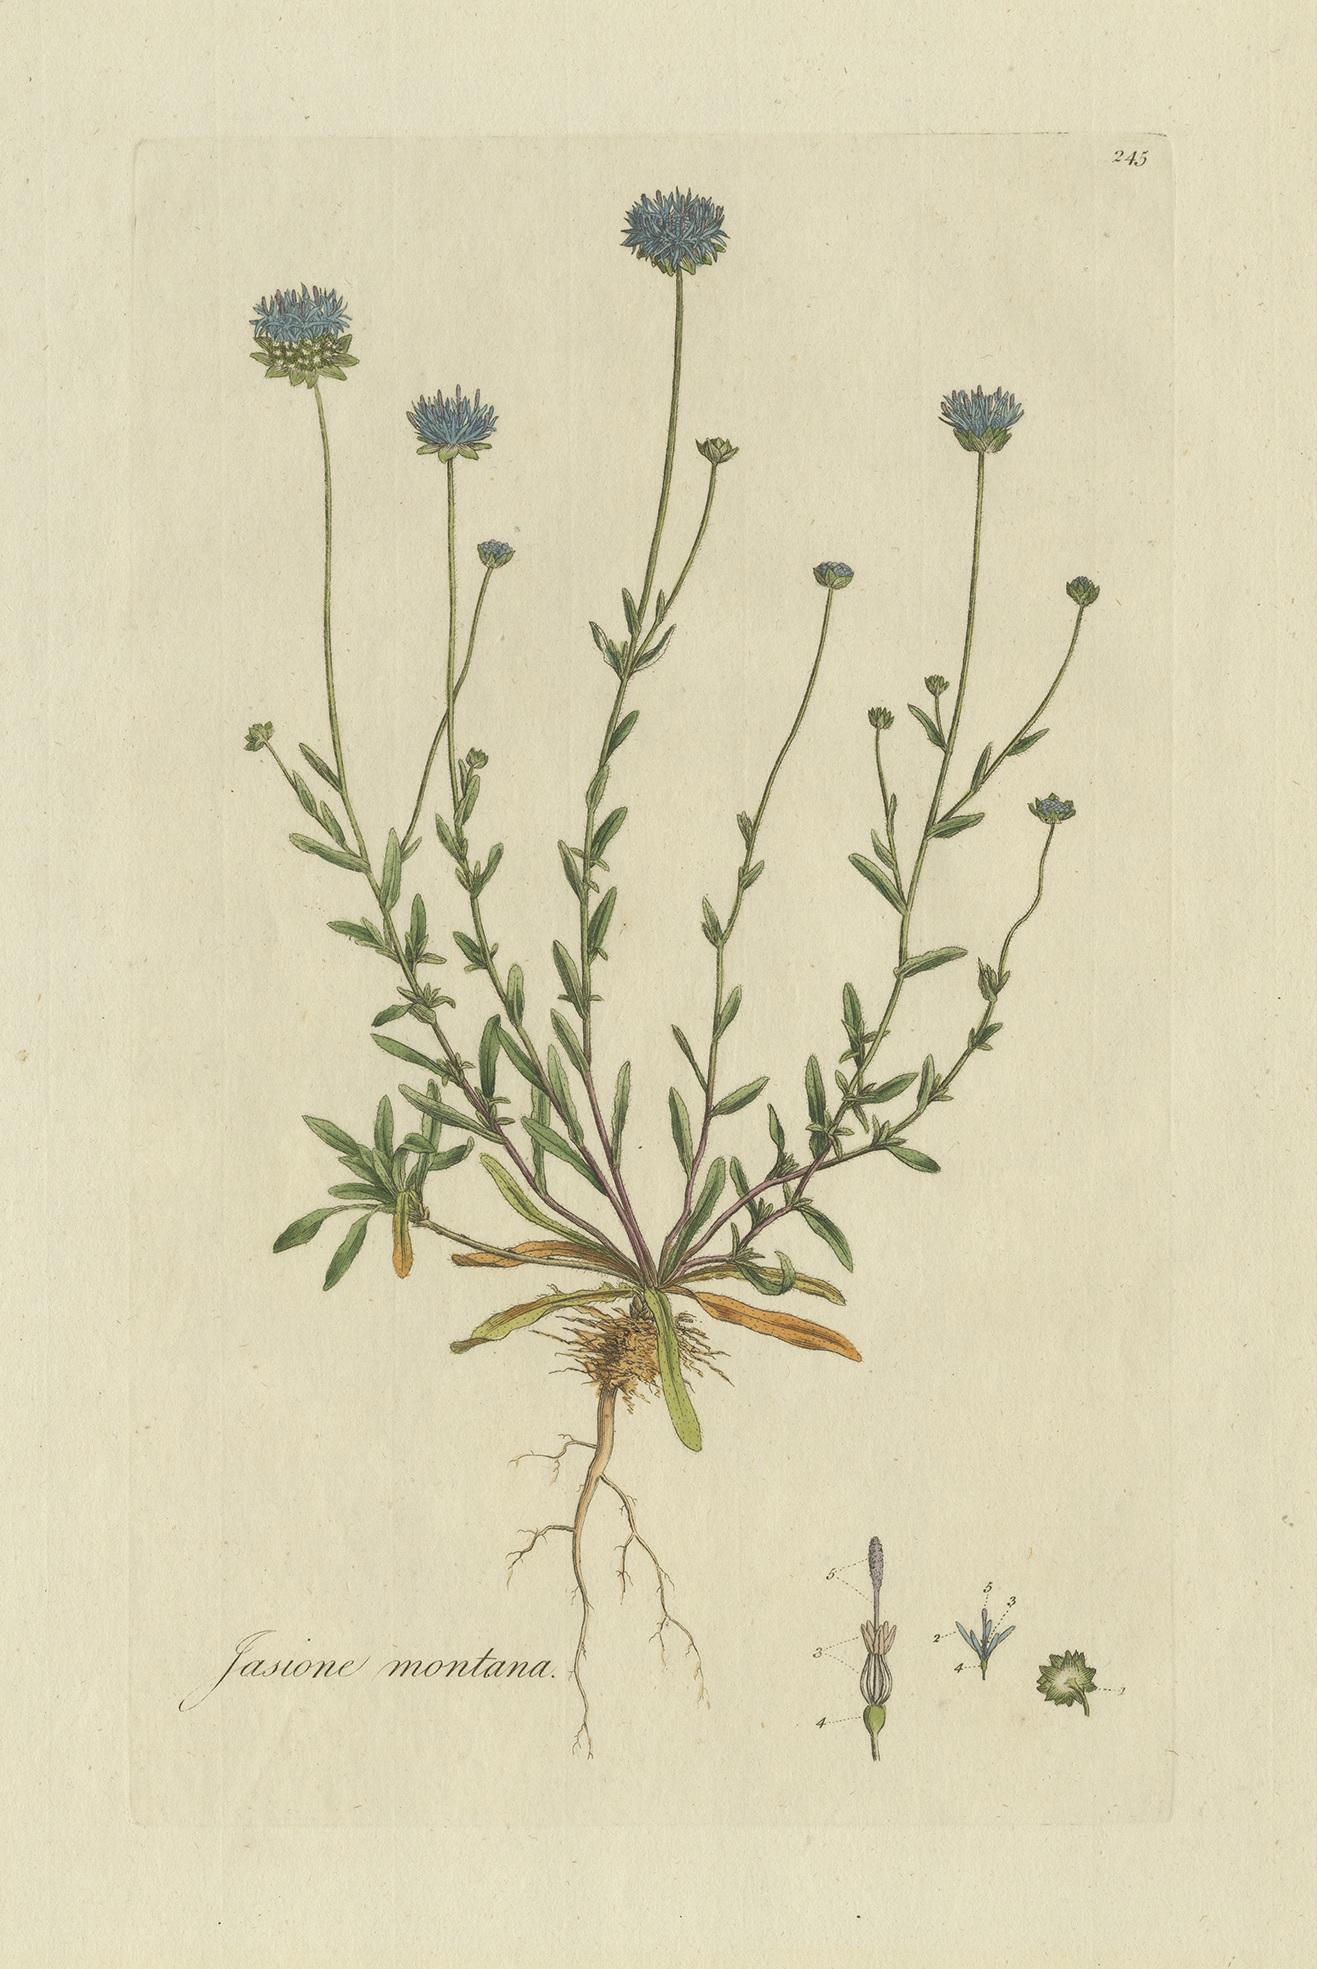 Antique botany print titled 'Jasione Montana'. Hand colored engraving of the jasione montana, a low-growing plant in the family Campanulaceae found in rocky places and upland regions of Europe and western Asia. This print originates from 'Flora